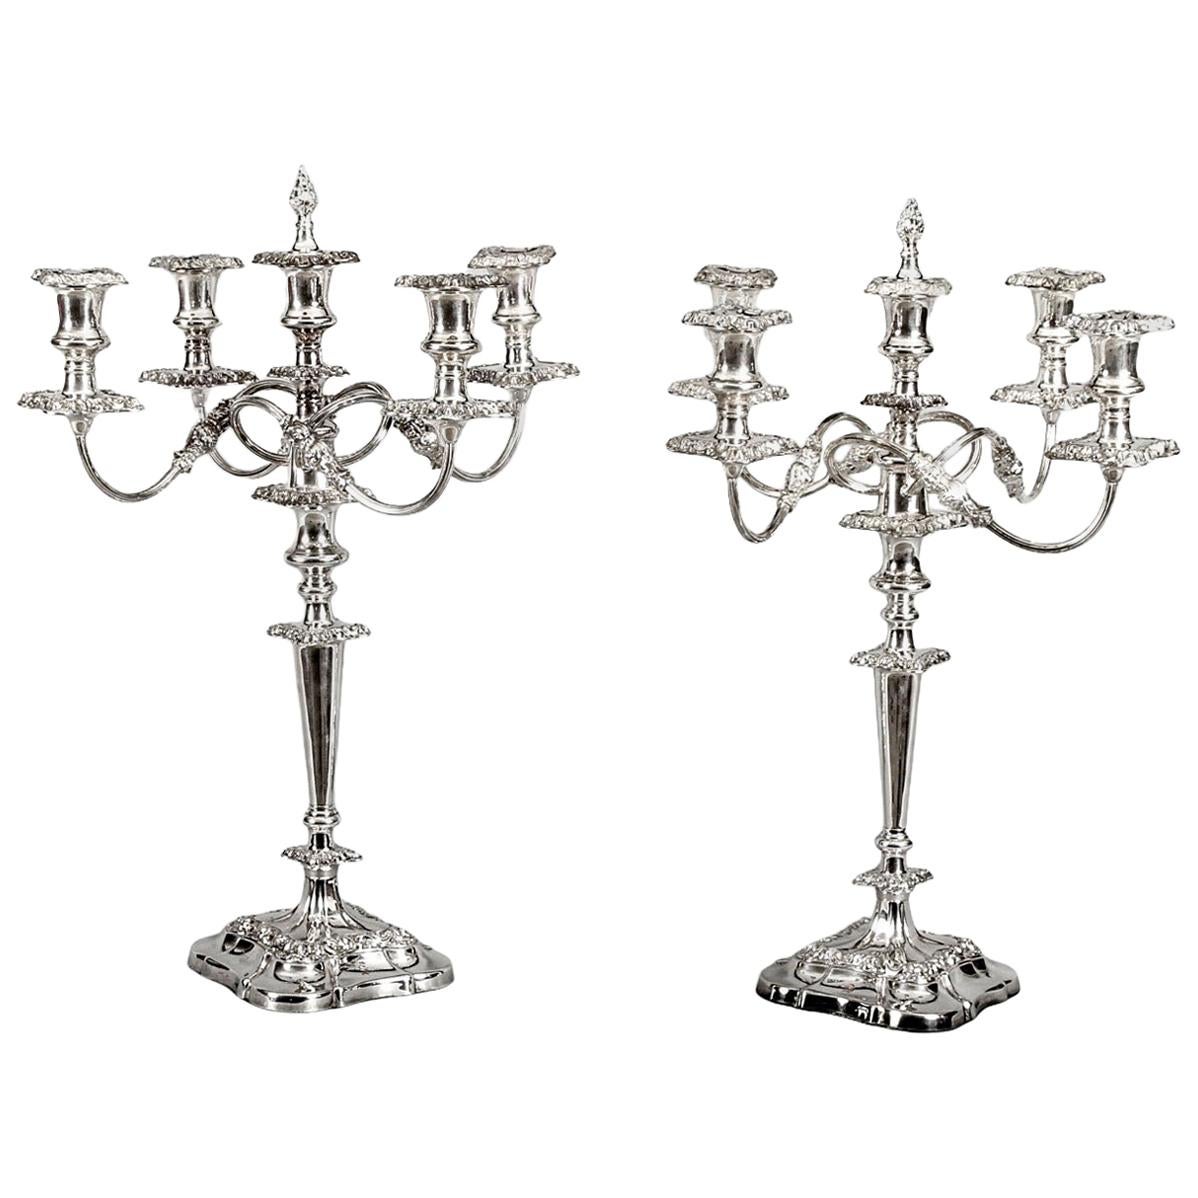 Antique Pair of Five-Light Candelabra by Mappin & Webb, 19th Century